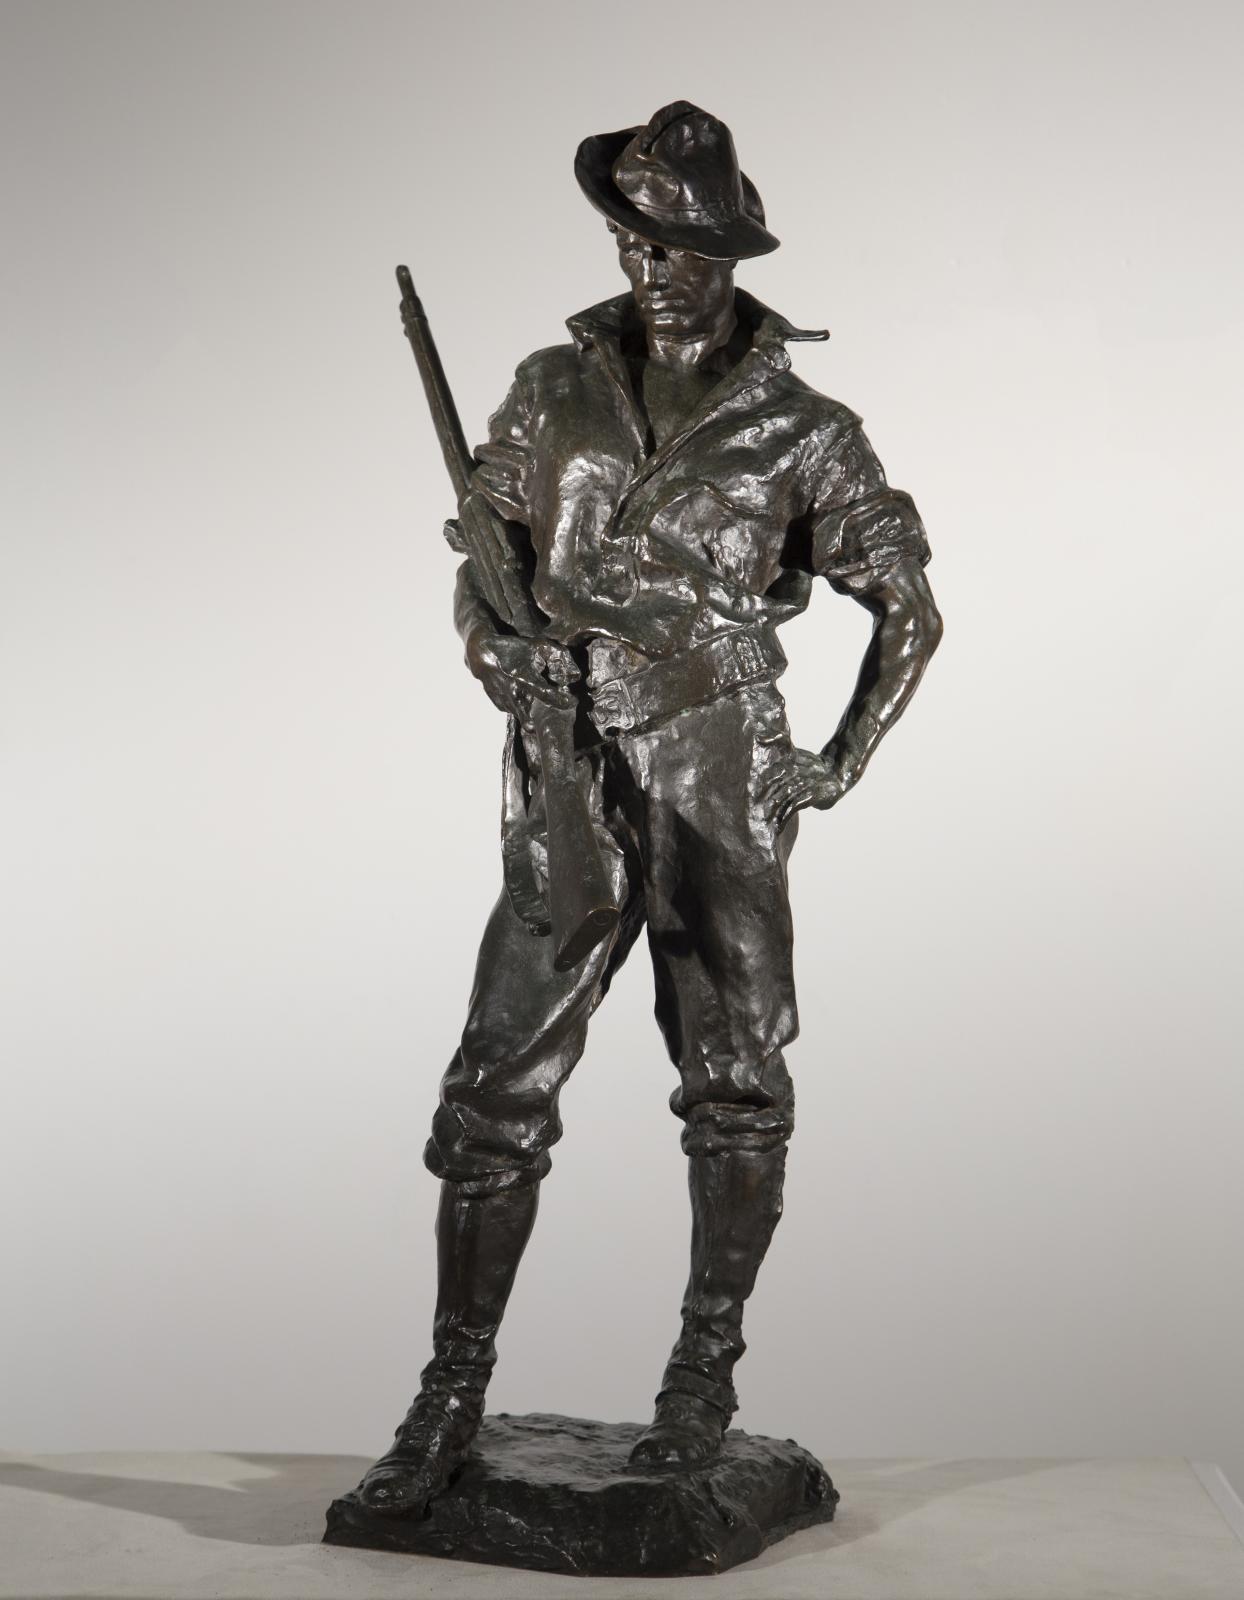 Allen George Newman, The Hiker, Conceived 1904, cast 1910